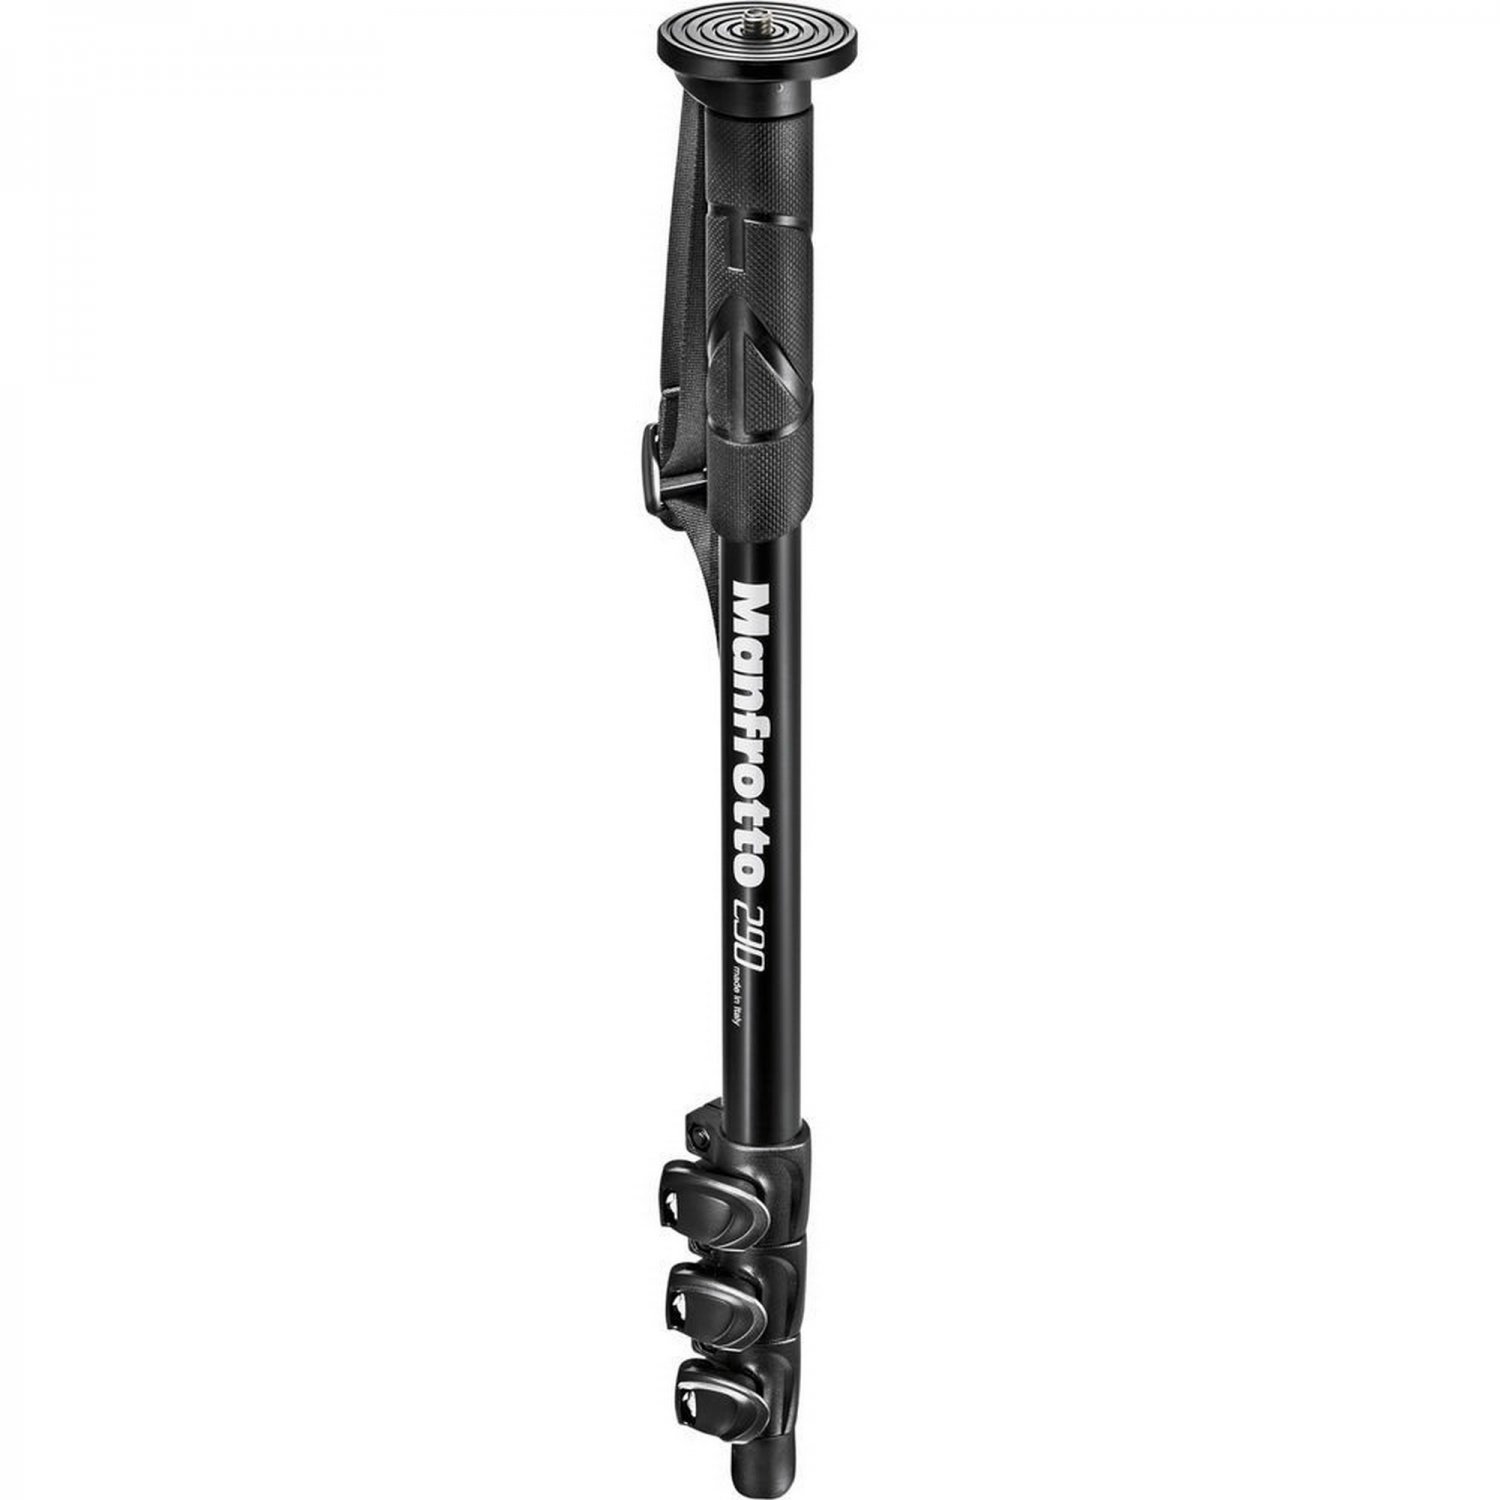 Manfrotto monopie MM290A4 001